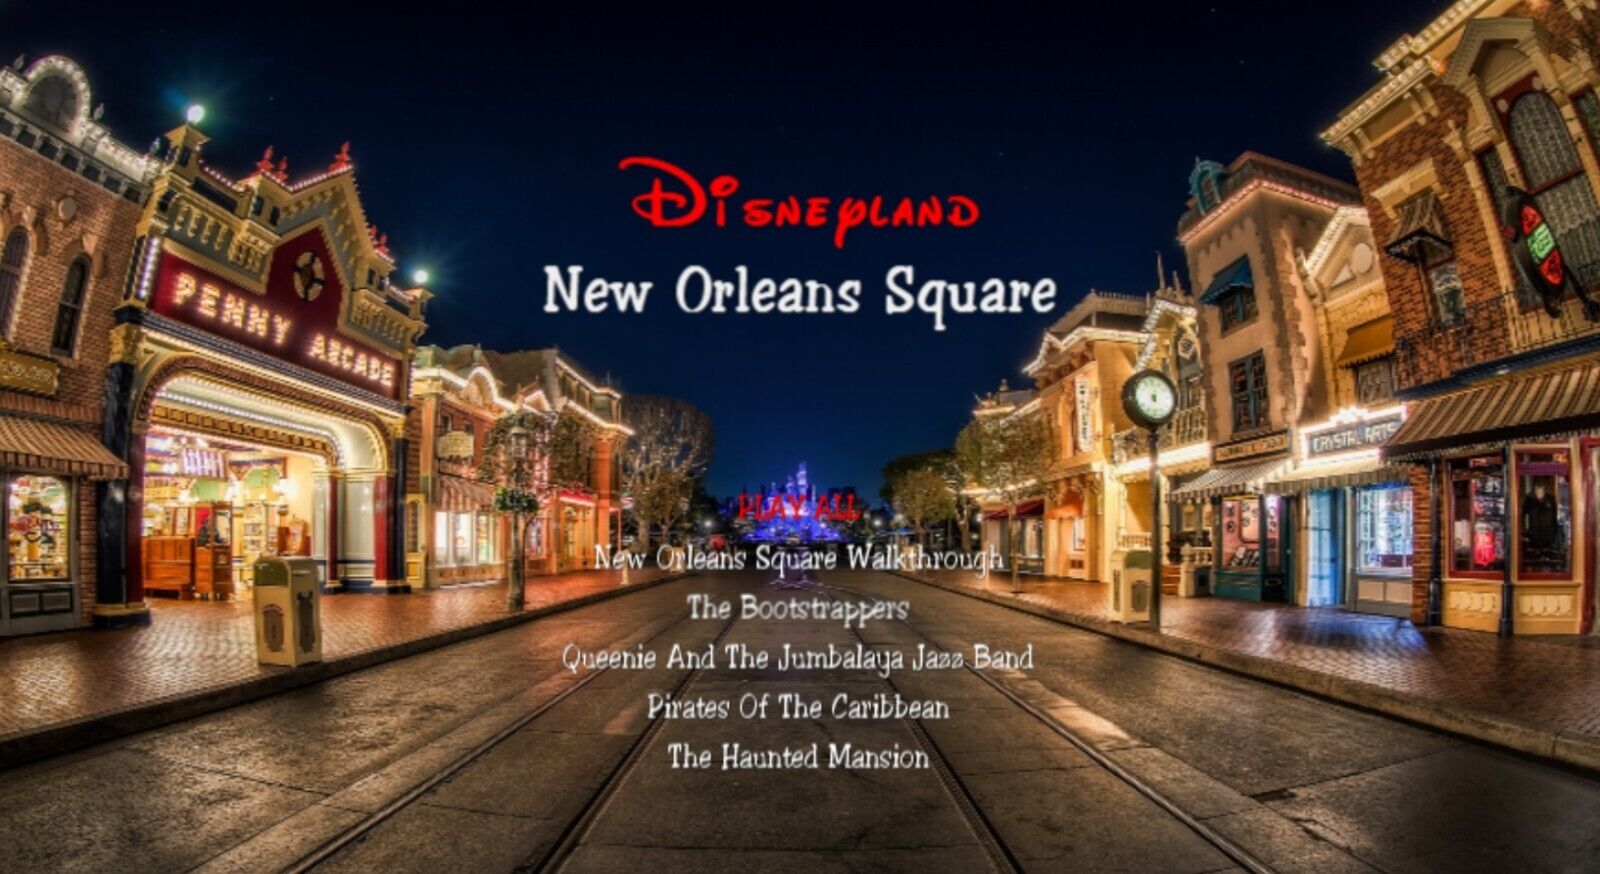 Disneyland Attractions DVD 06 - New Orleans Square